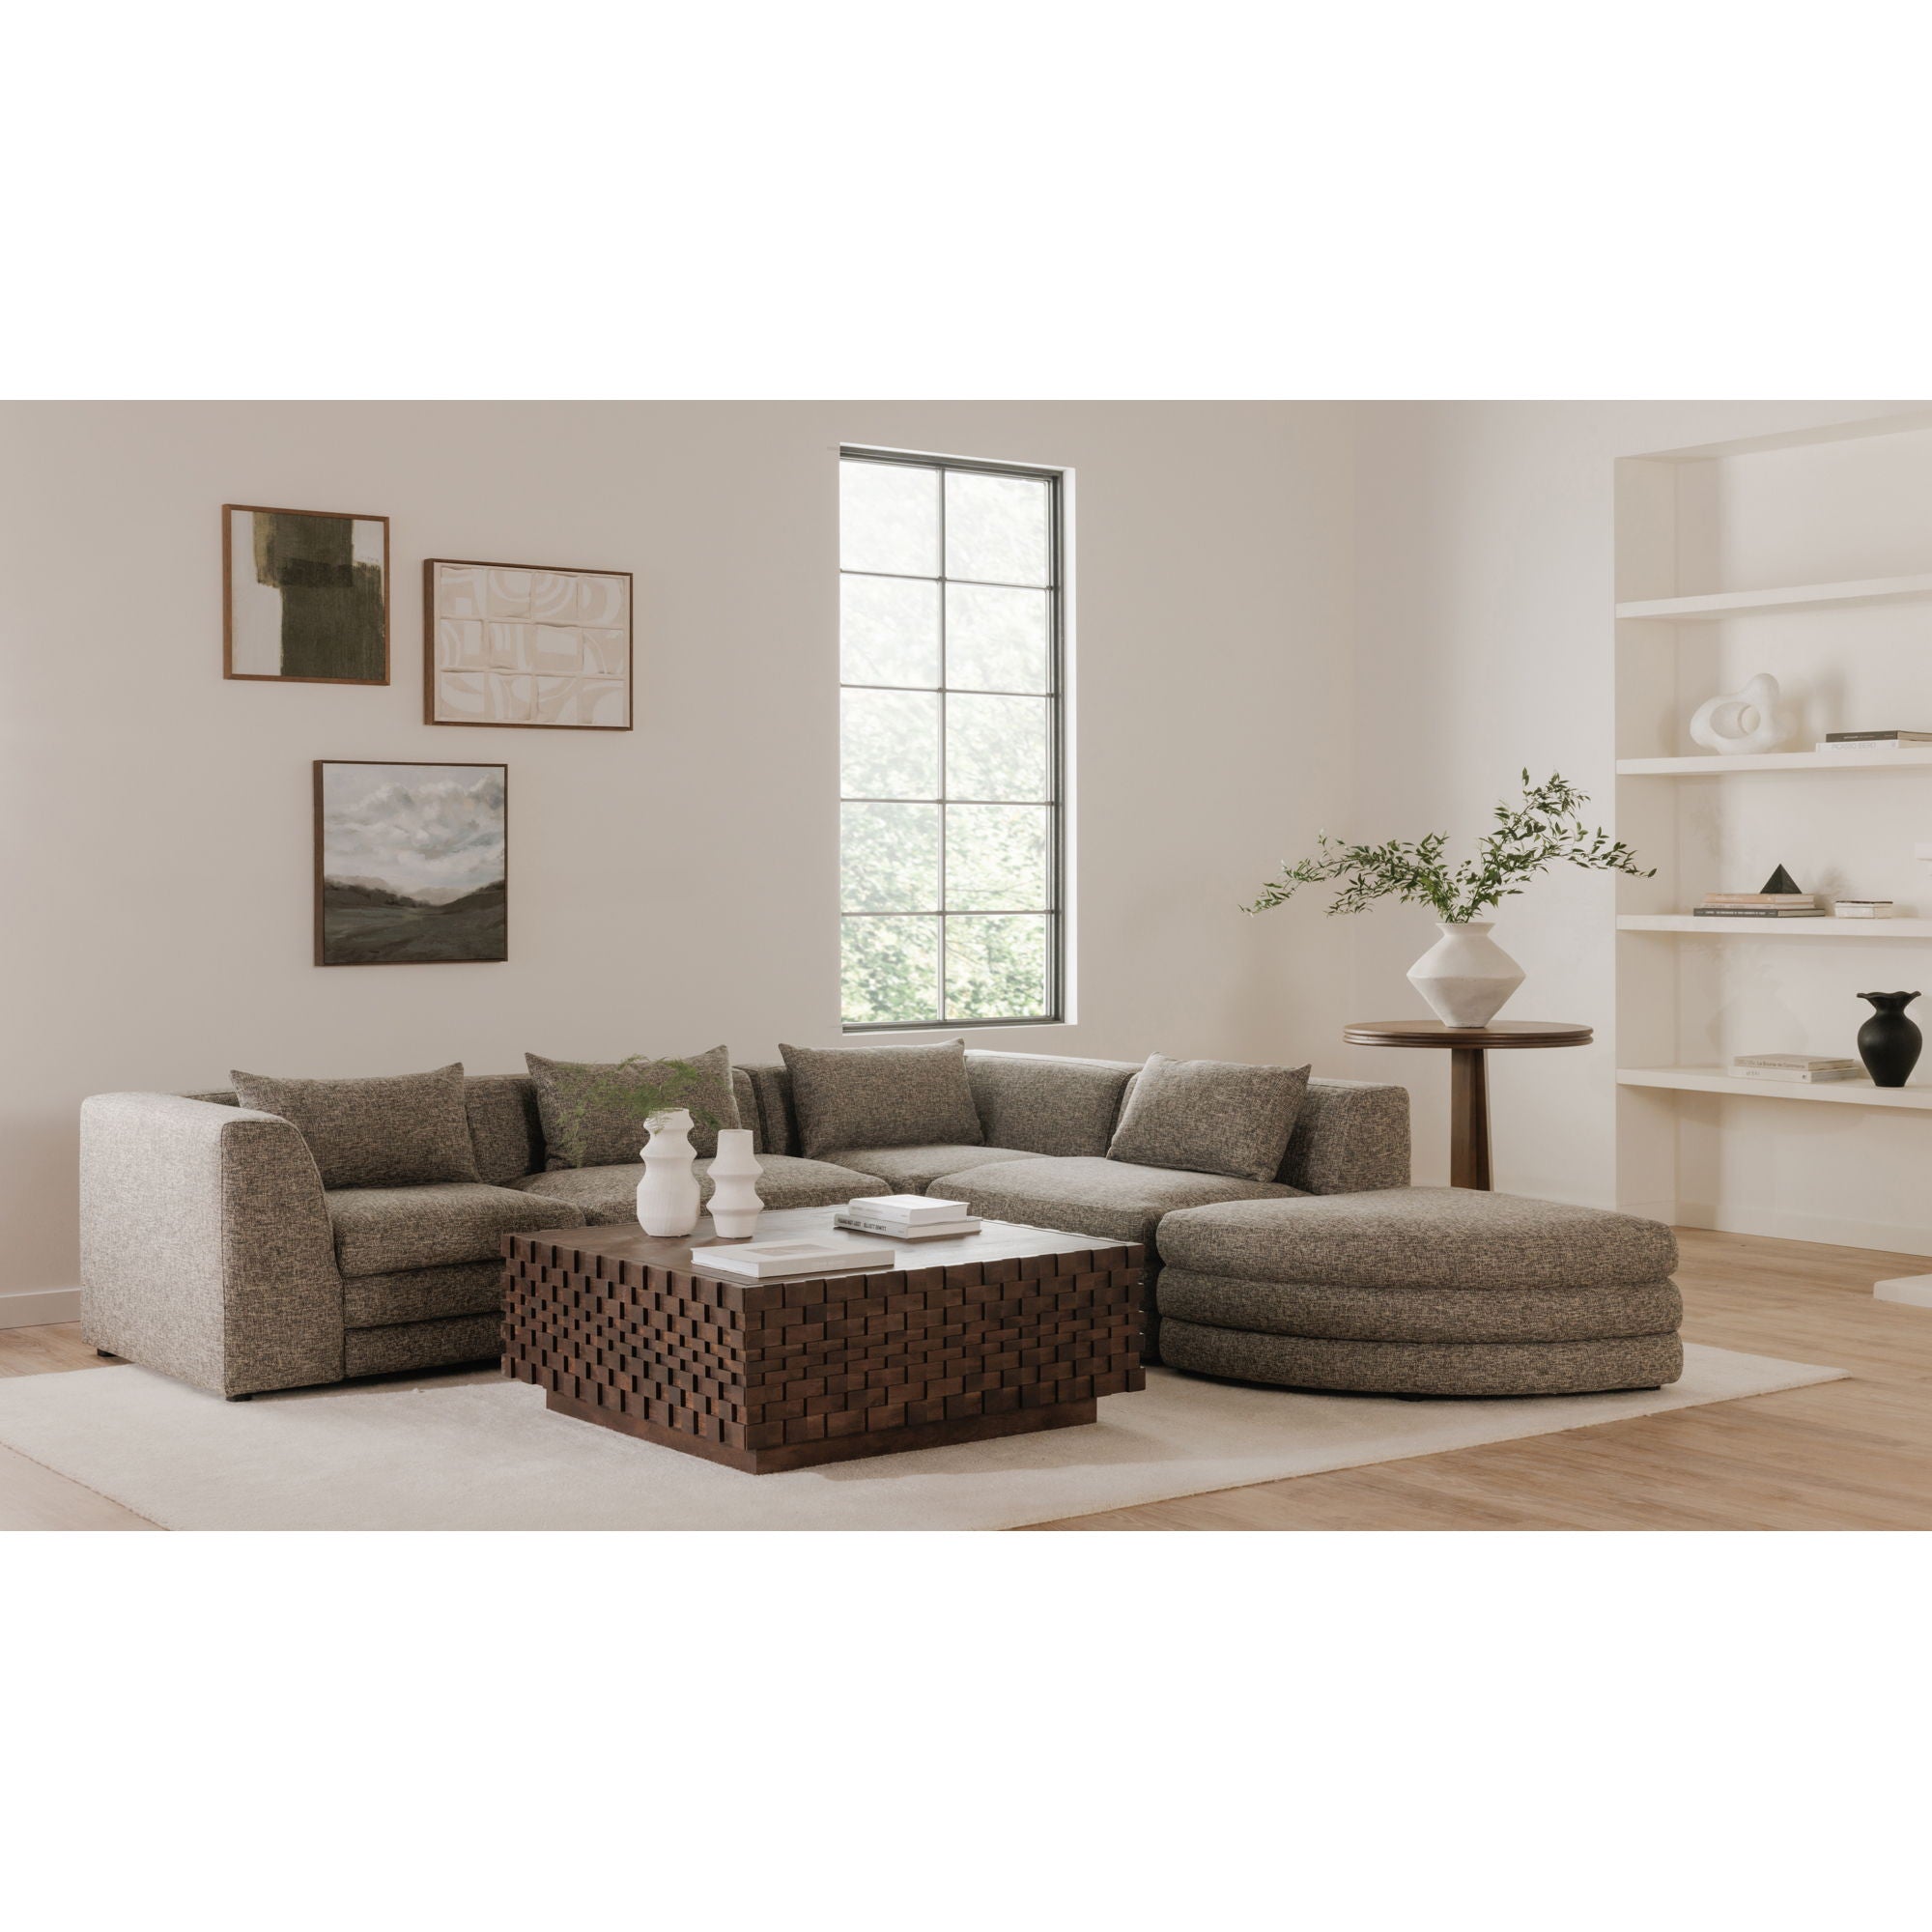 Lowtide - Alcove Modular Configuration - Surie Shadow-Stationary Sectionals-American Furniture Outlet